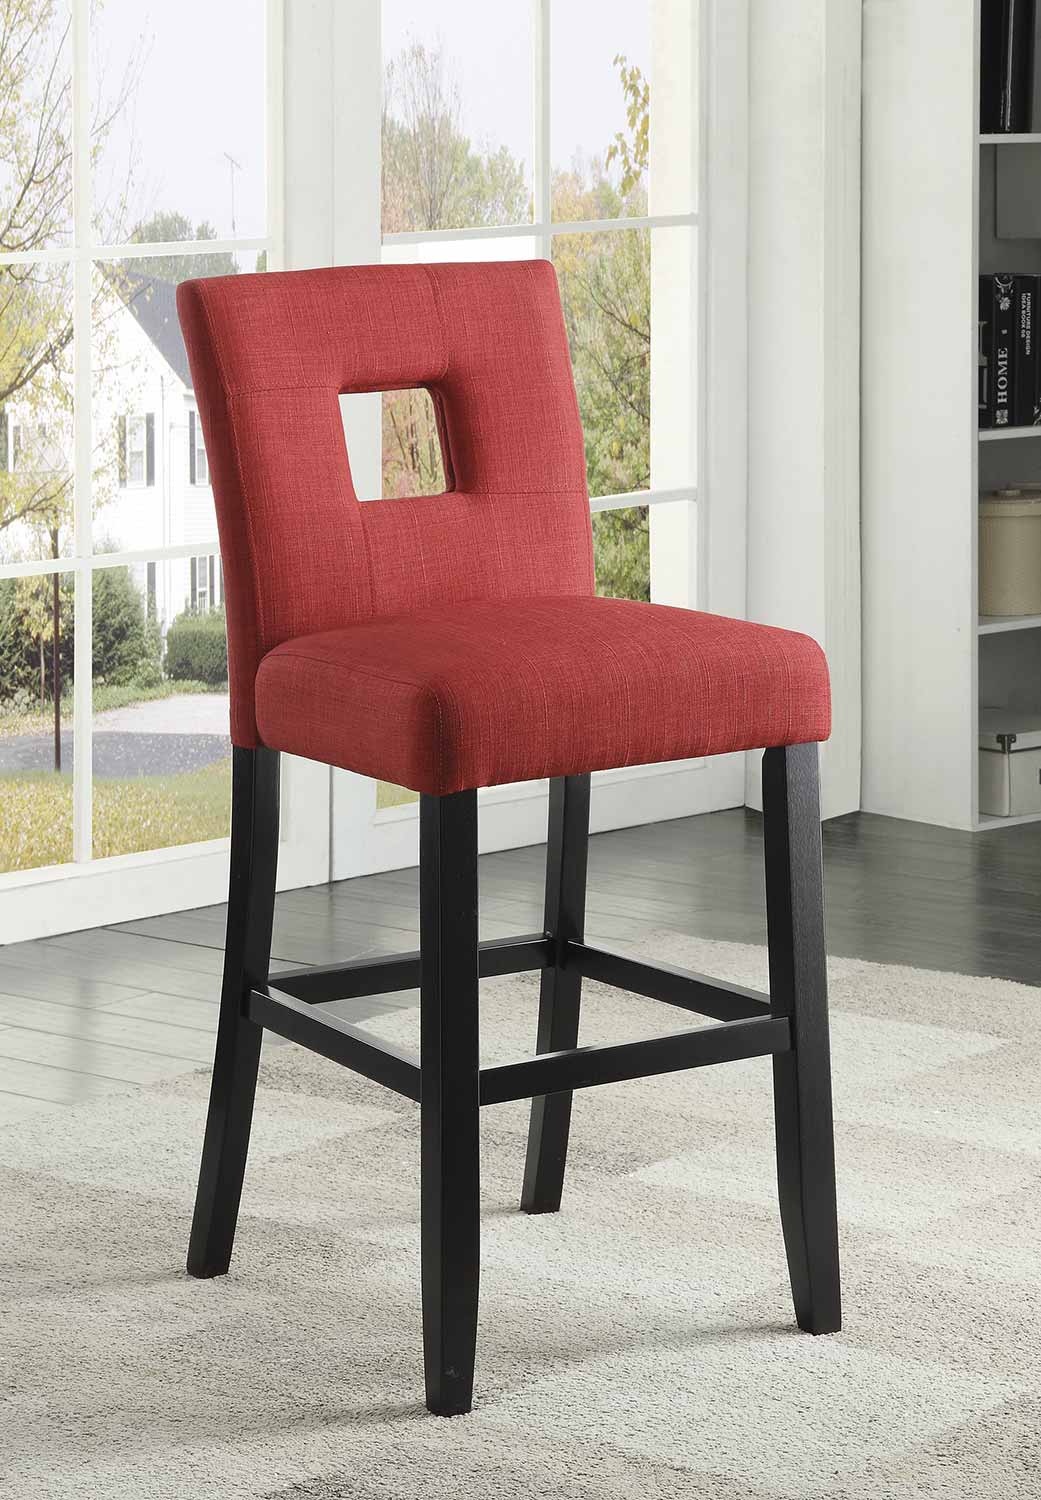 Coaster Andenne Counter Height Chair - Red/Black